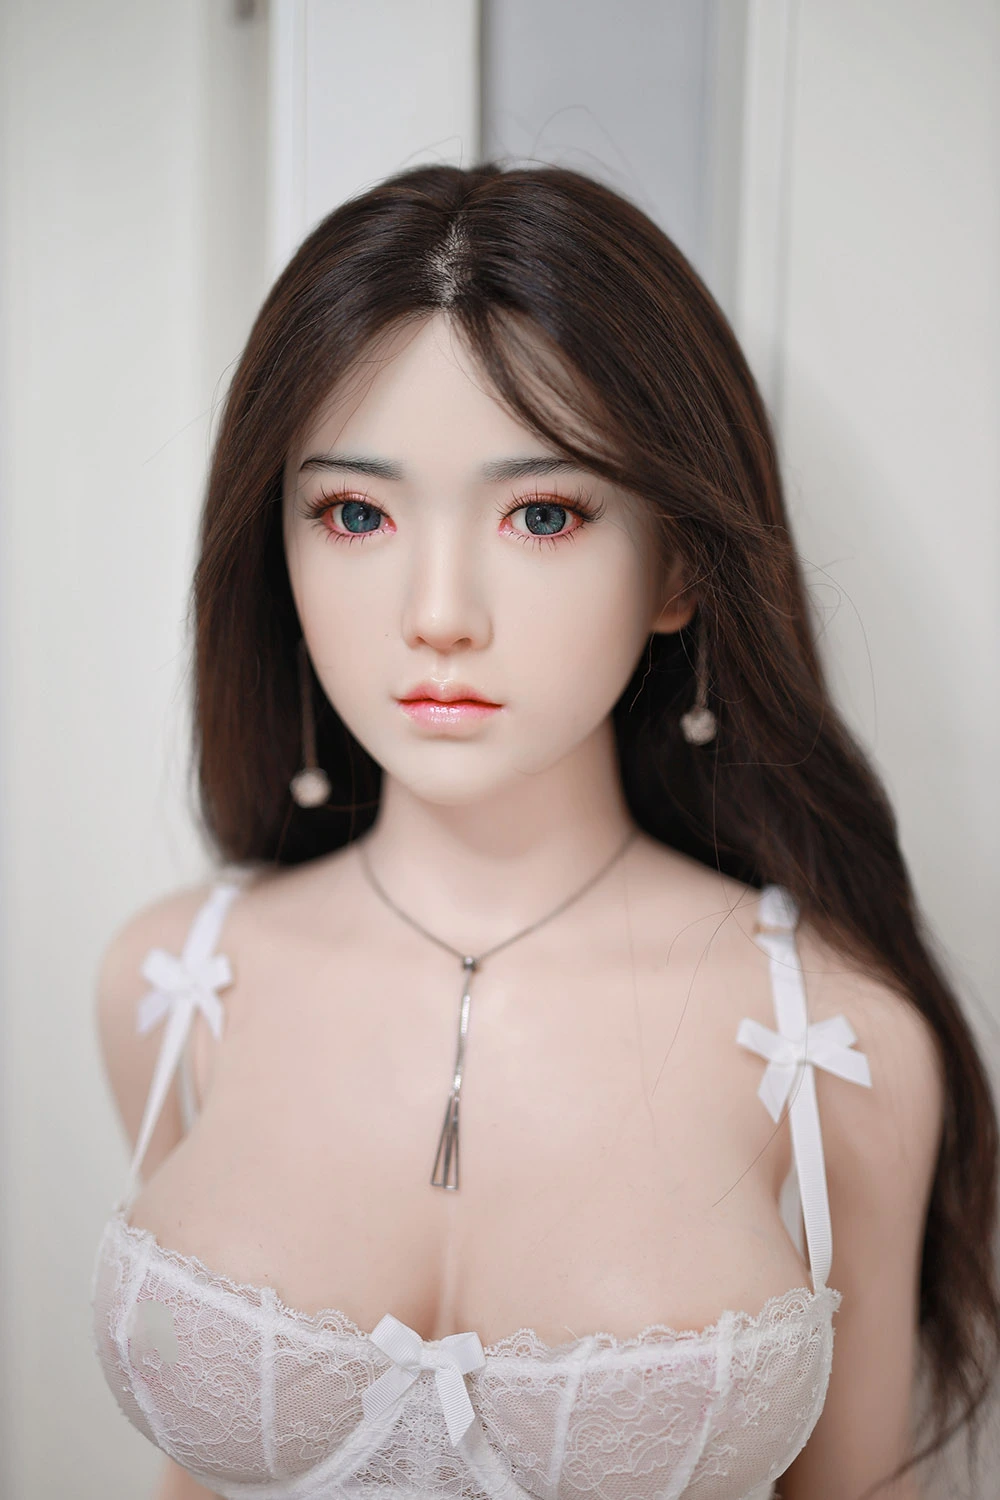 165cm Skinny Curves Japanese Teen Sex Doll Qi Xiao